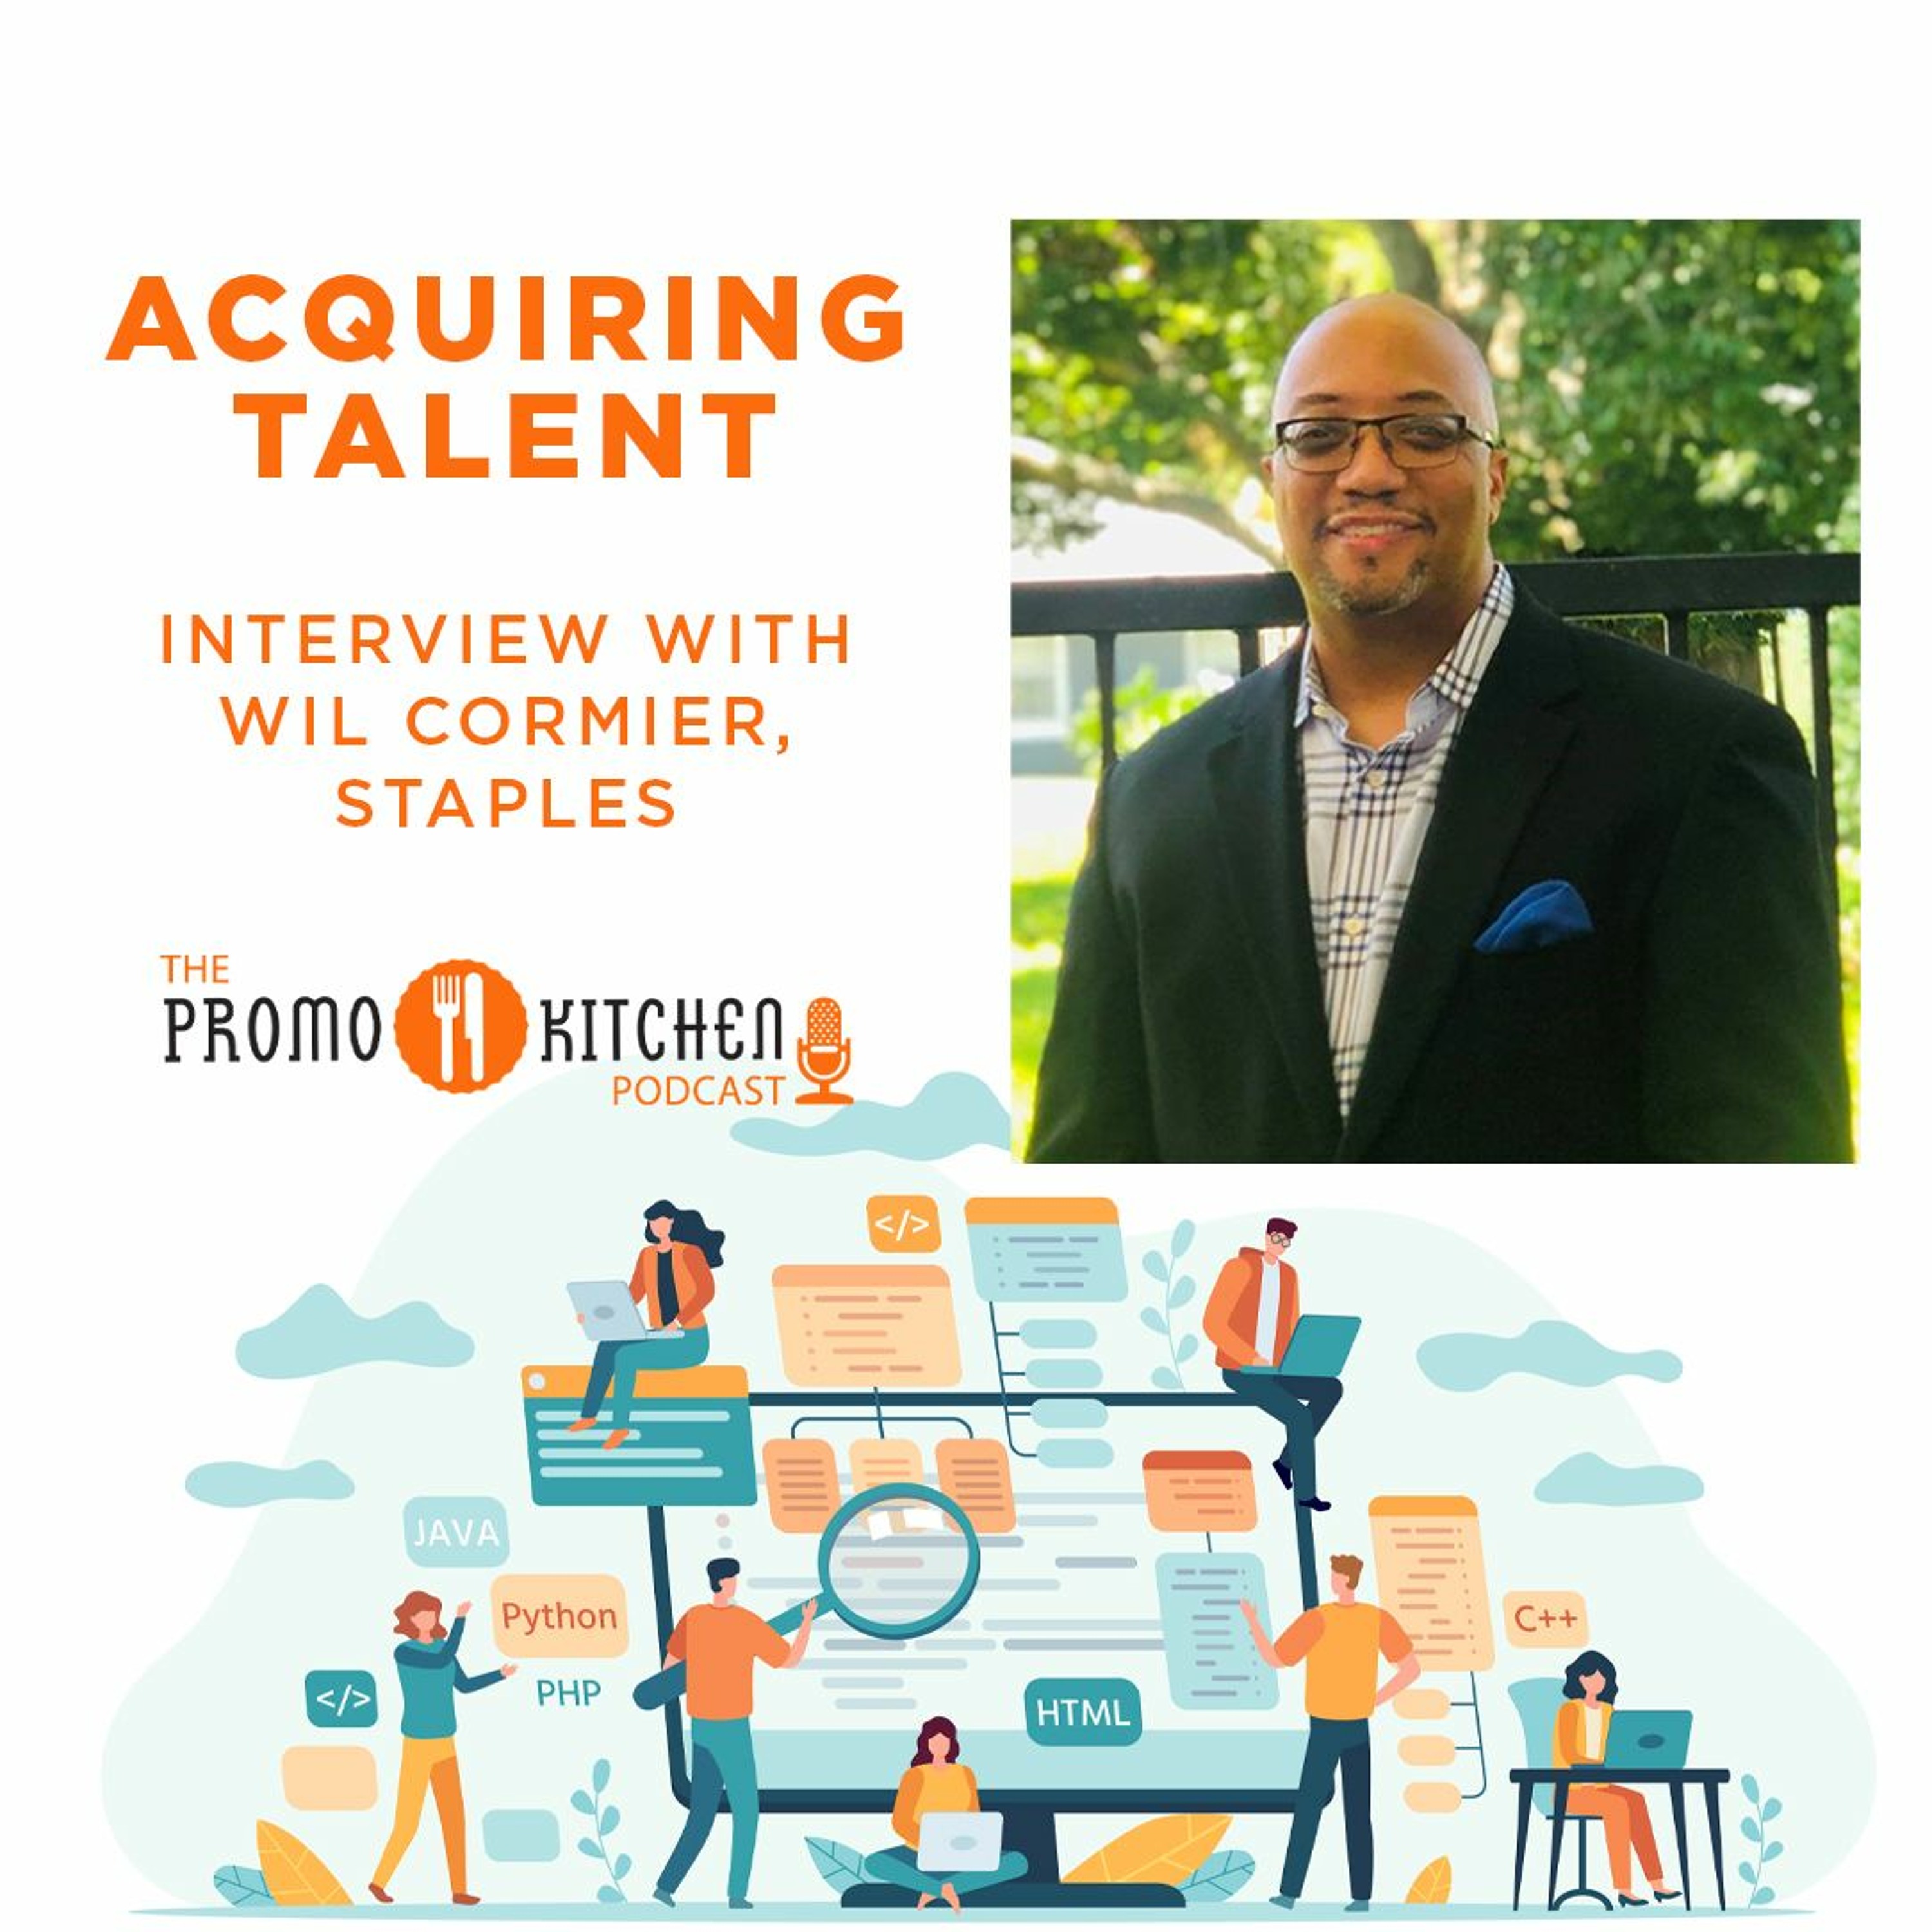 Acquiring Talent: Interview with Wil Cormier, Staples